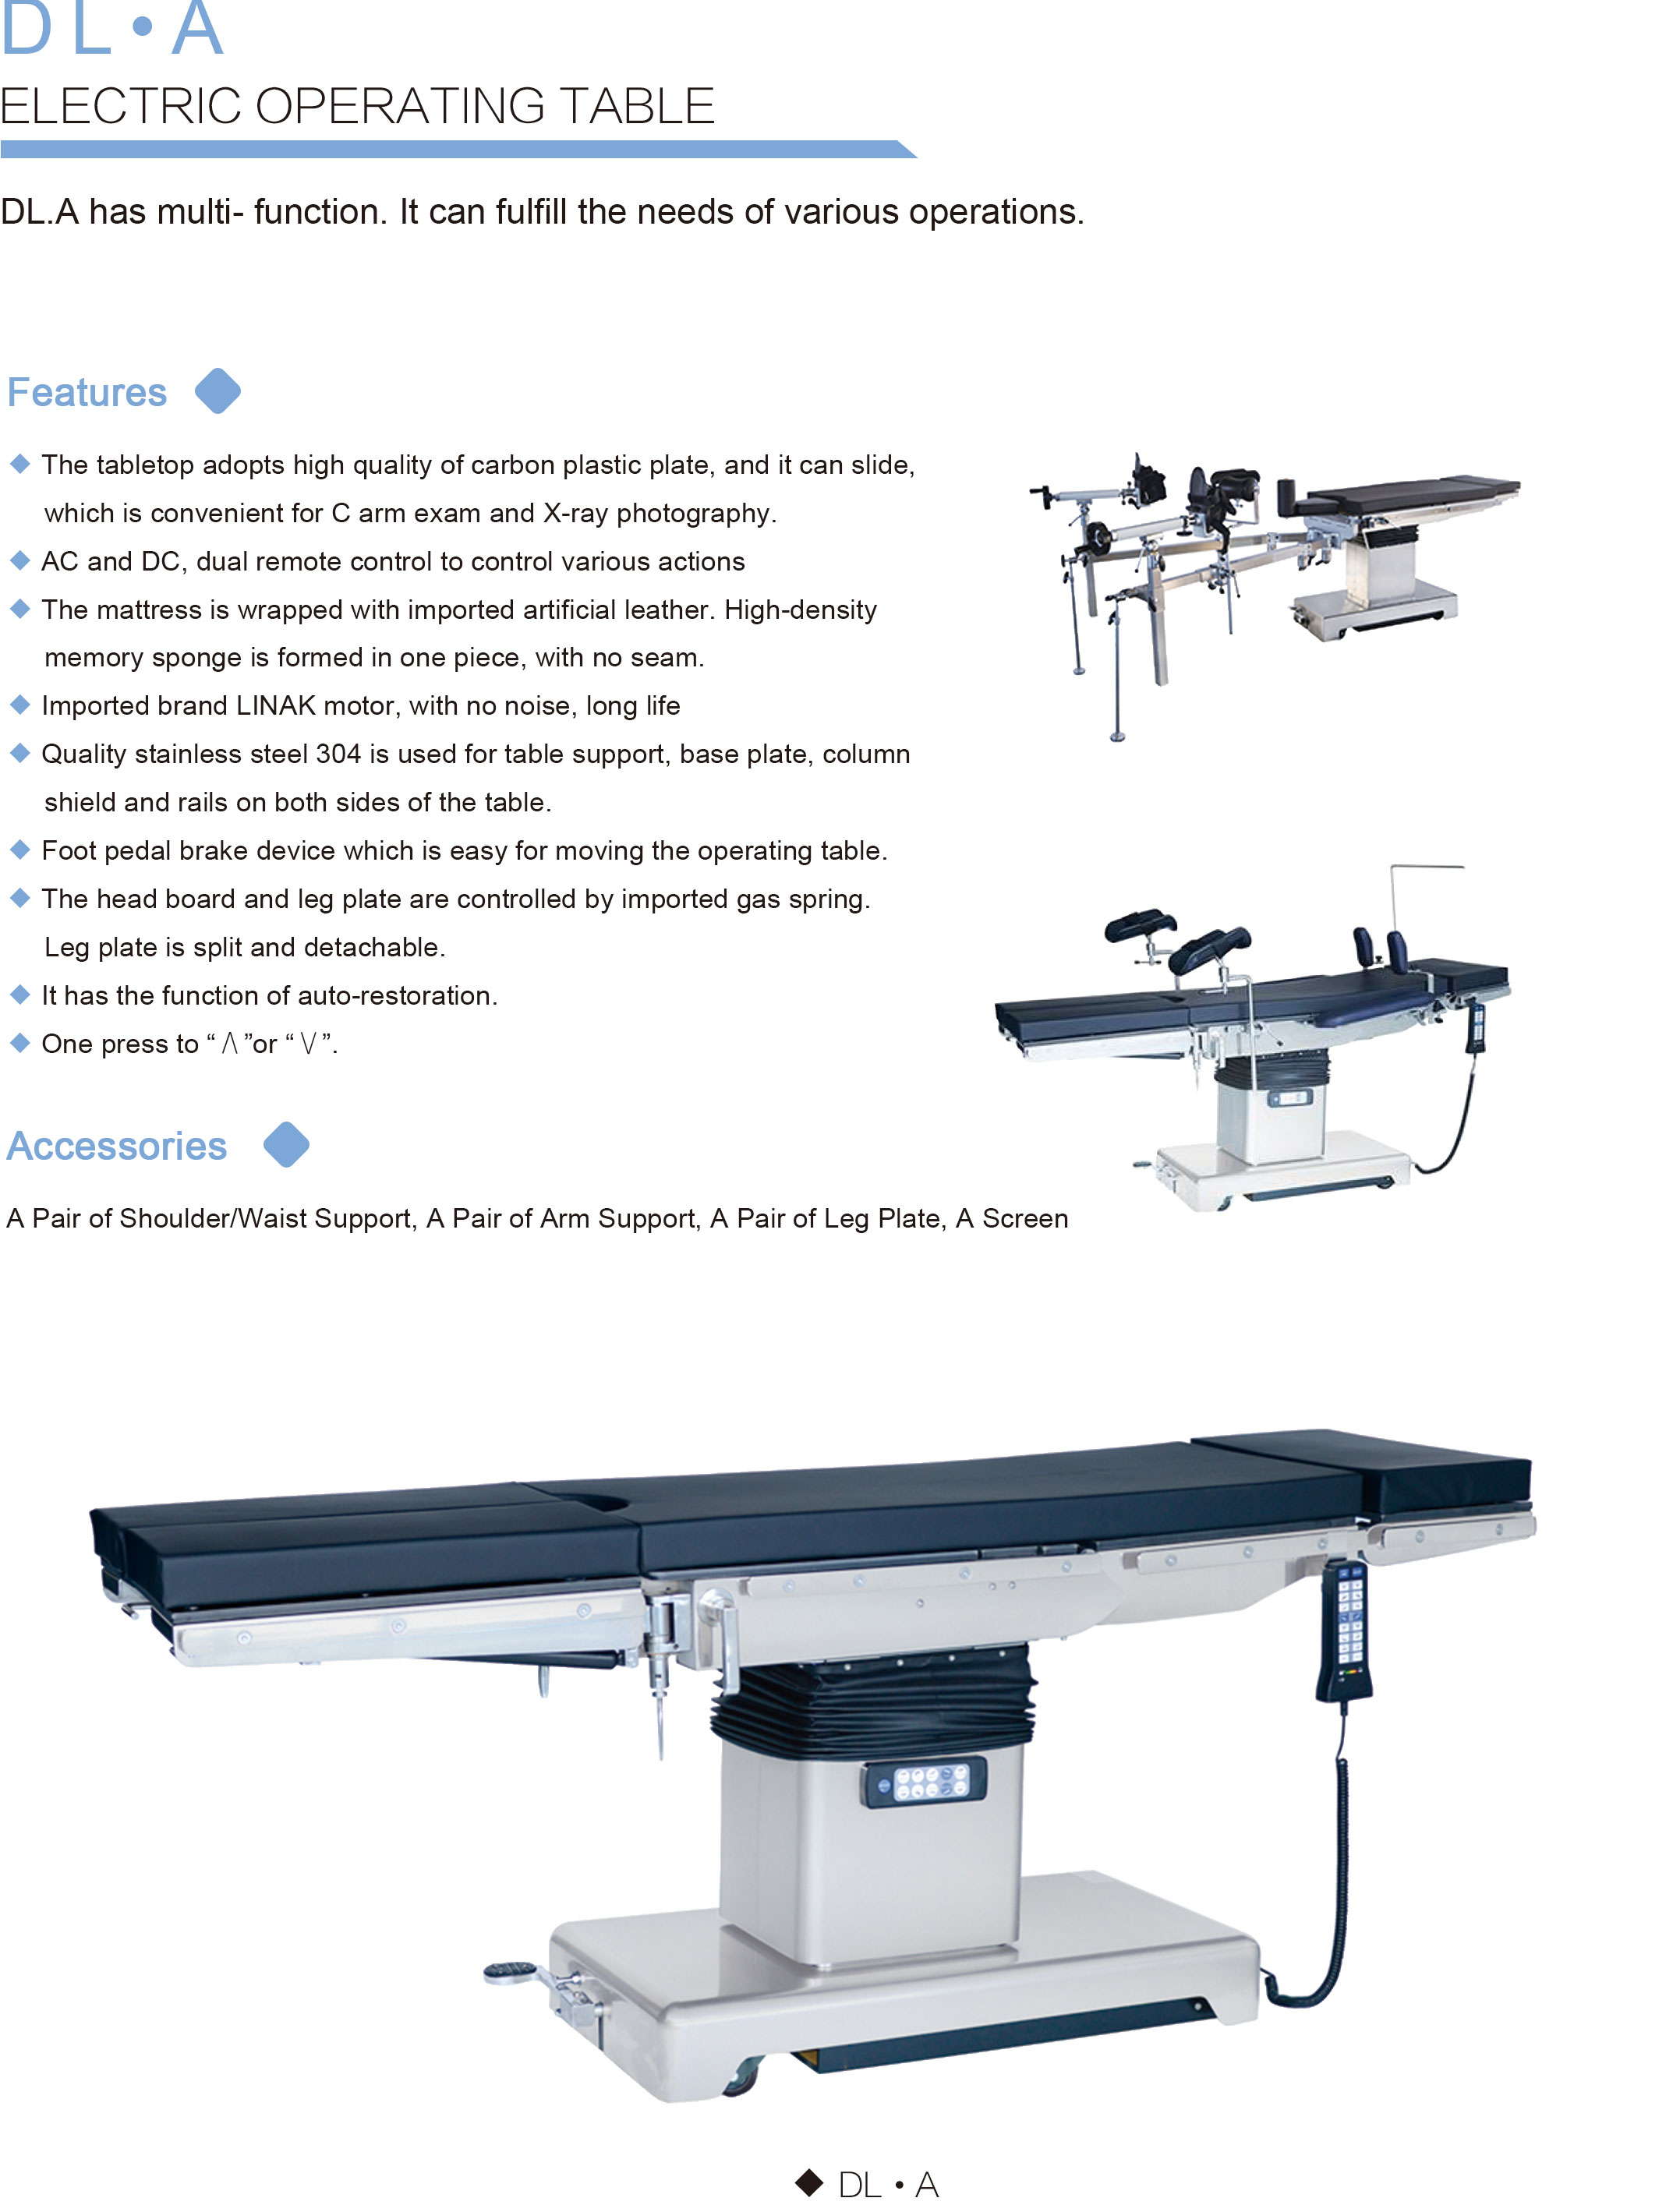 Factory Supply Hospital Carbon Fiber Electric Surgical Operating Table With Accessories